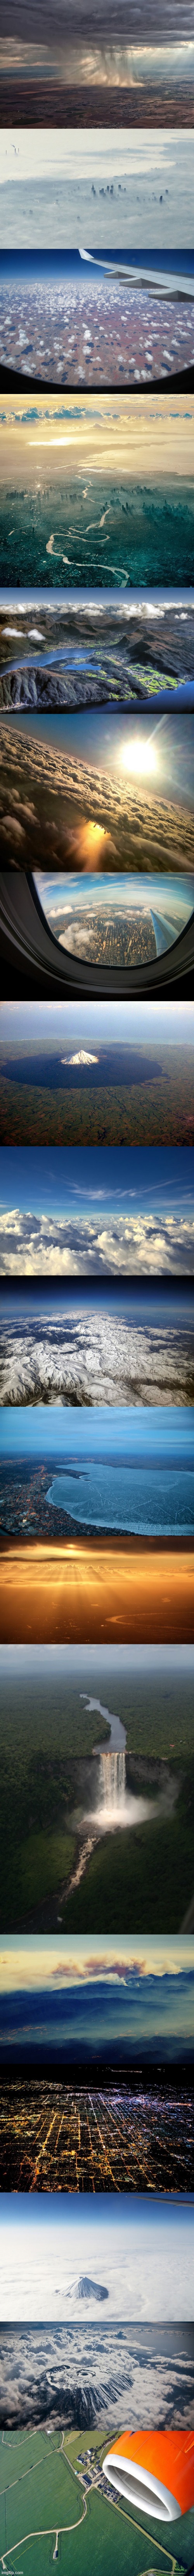 Photos Taken From Window Seats Of Planes | image tagged in memes,awesome,awesome photos | made w/ Imgflip meme maker